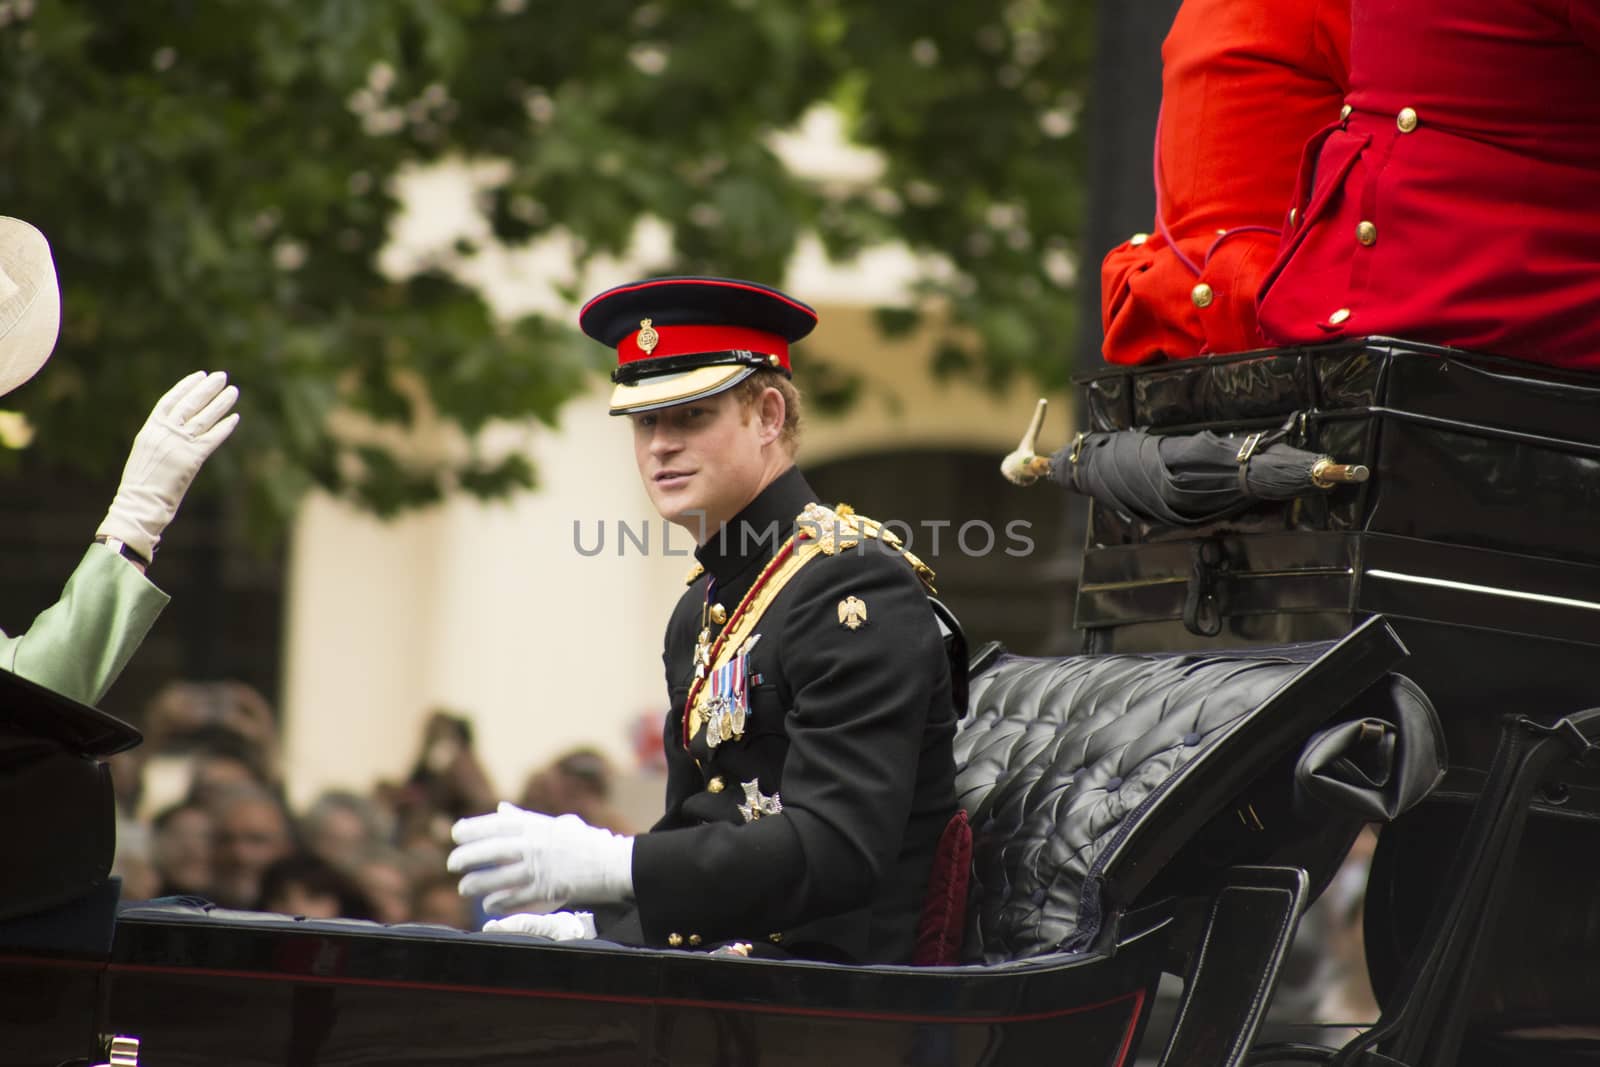 London, England - June 13, 2015:  Prince Harry in an open carriage for trooping the colour 2015 to mark the Queens official birthday, London, UK.